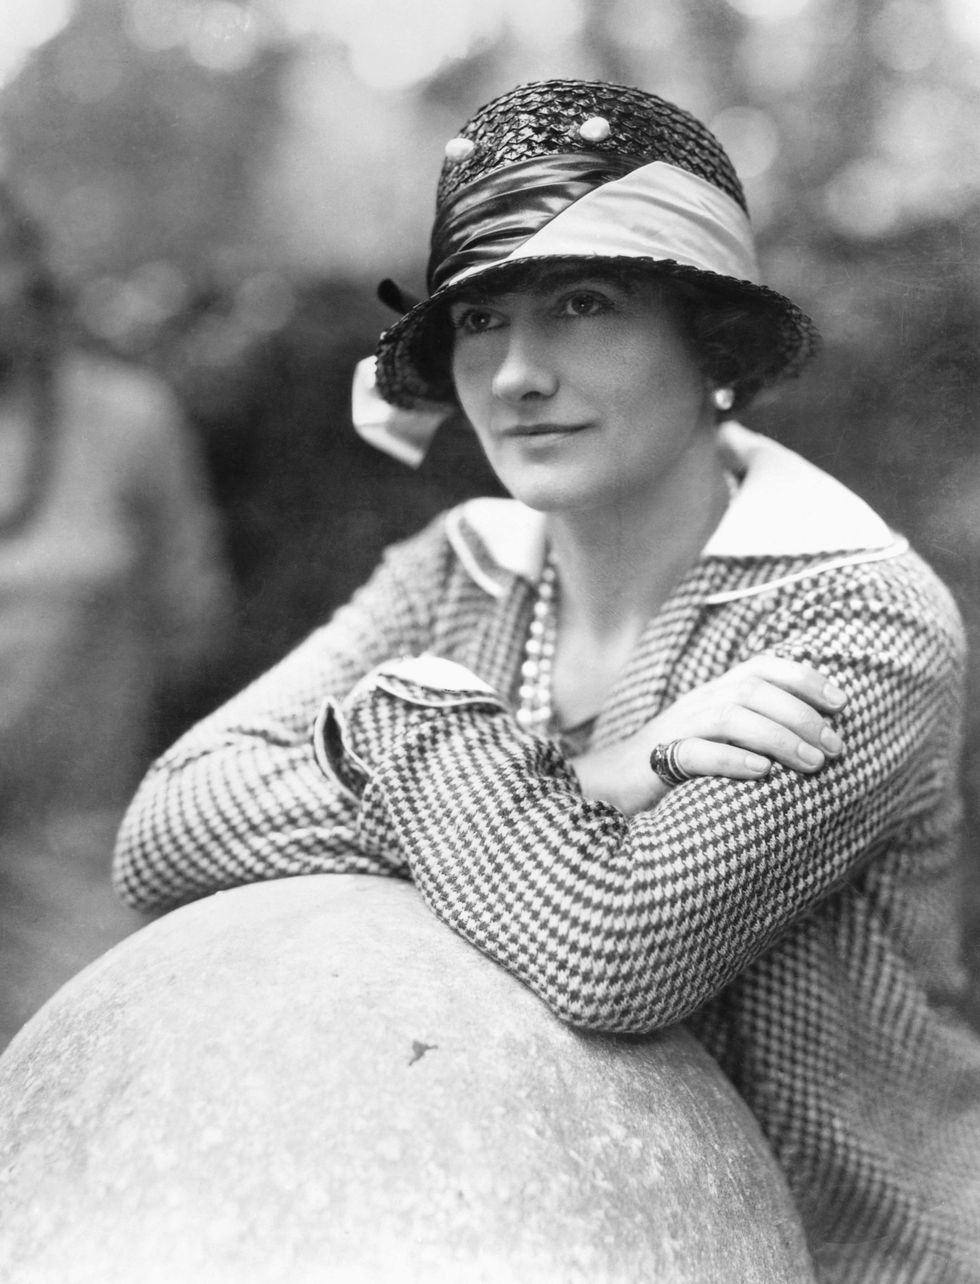 Designer Coco Chanel's influential fashion on show at London exhibit